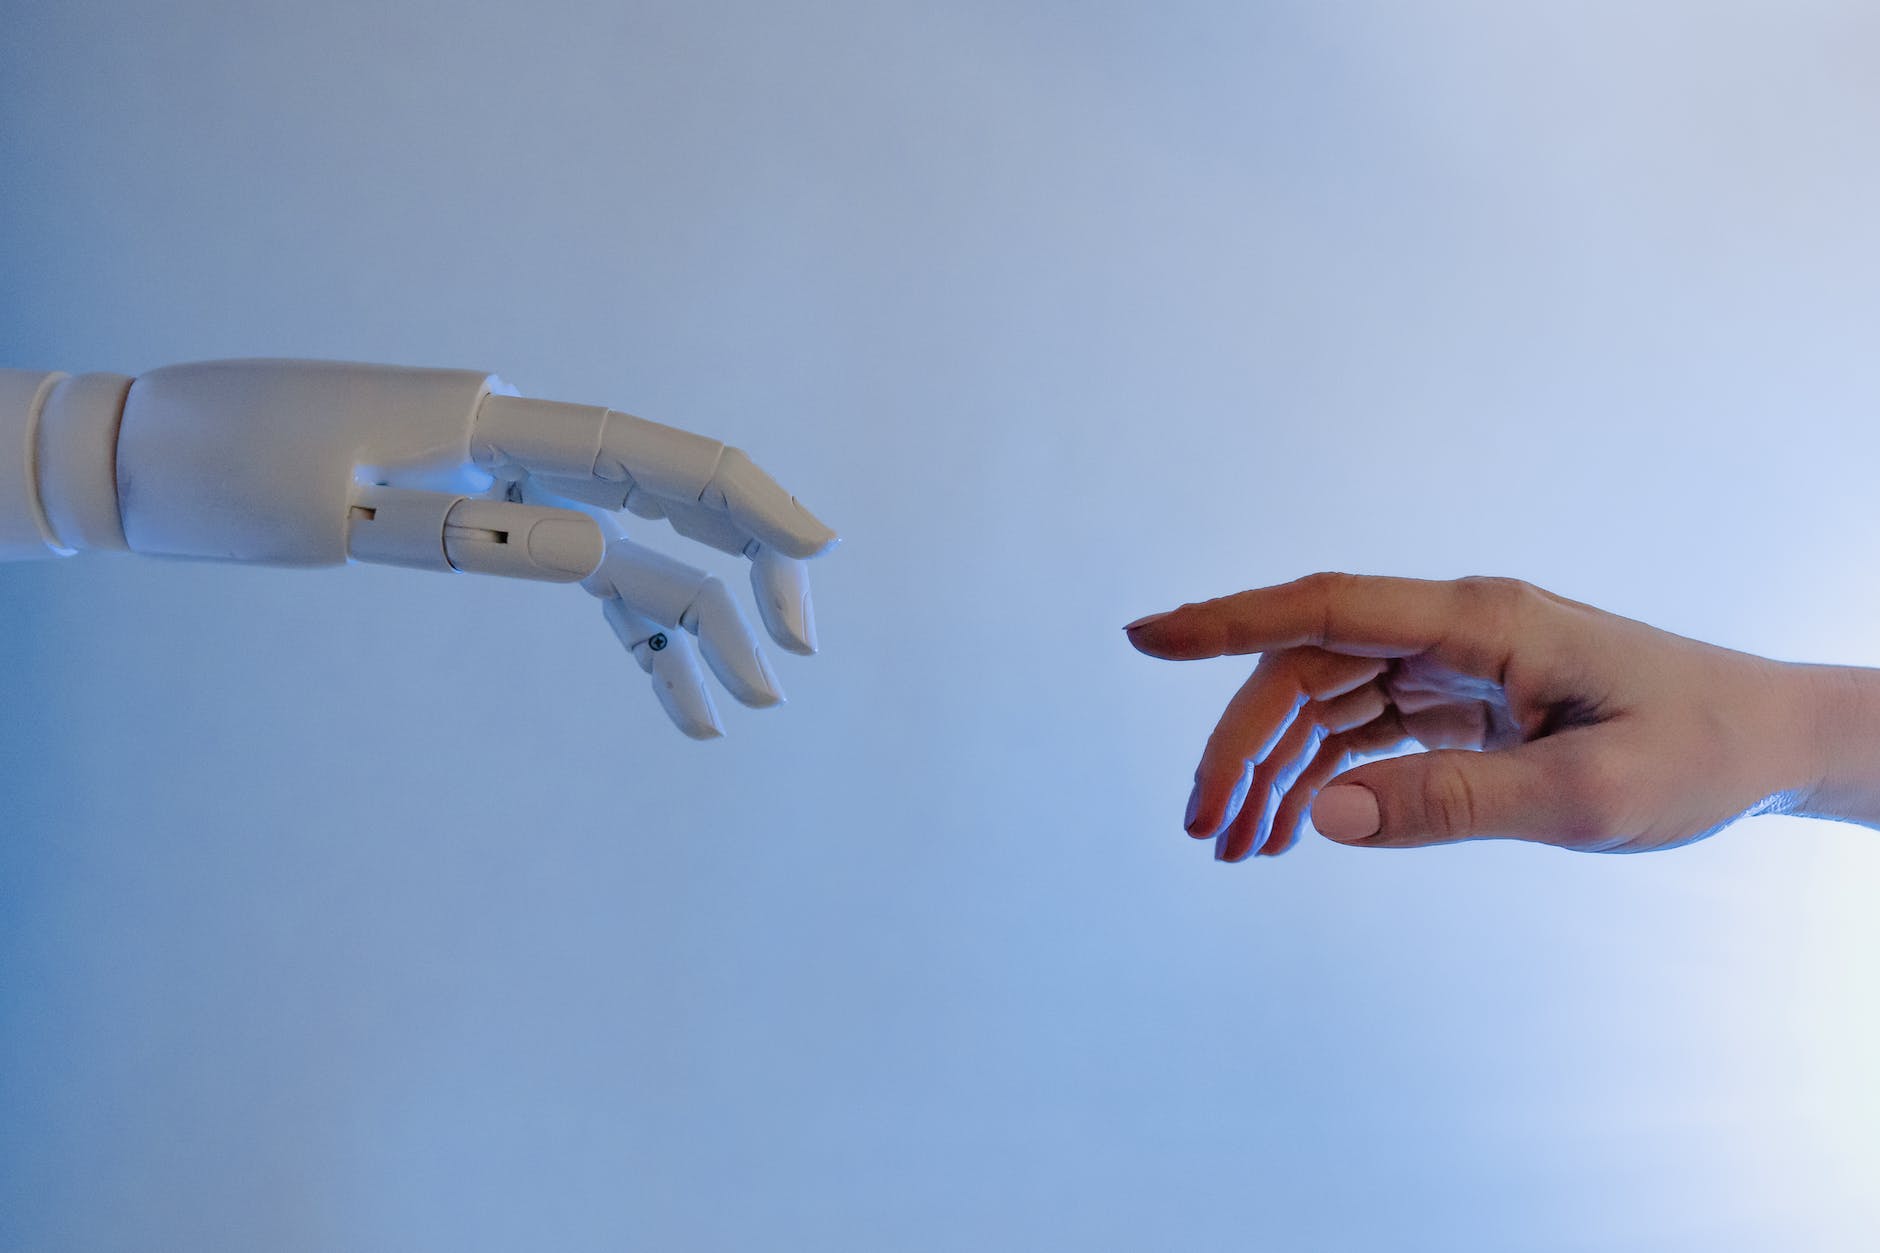 person reaching out to a robot